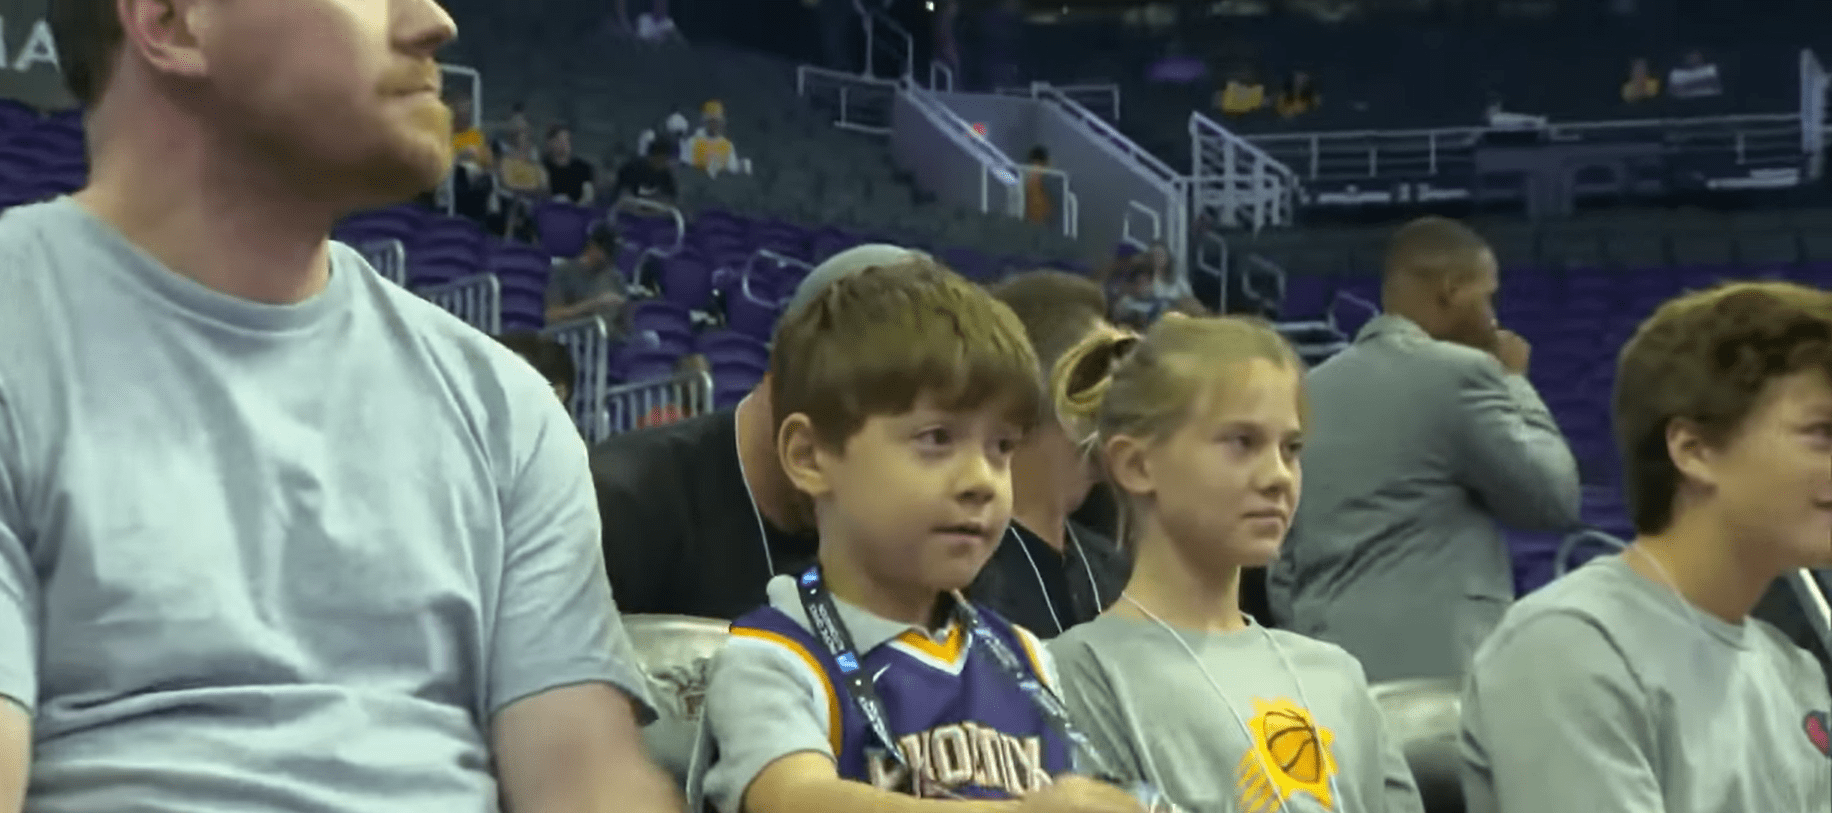 Teddy and his father, Ted Bollinger watching a basketball game at the Phoenix Suns NBA. | source: youtube.com/Inside Edition